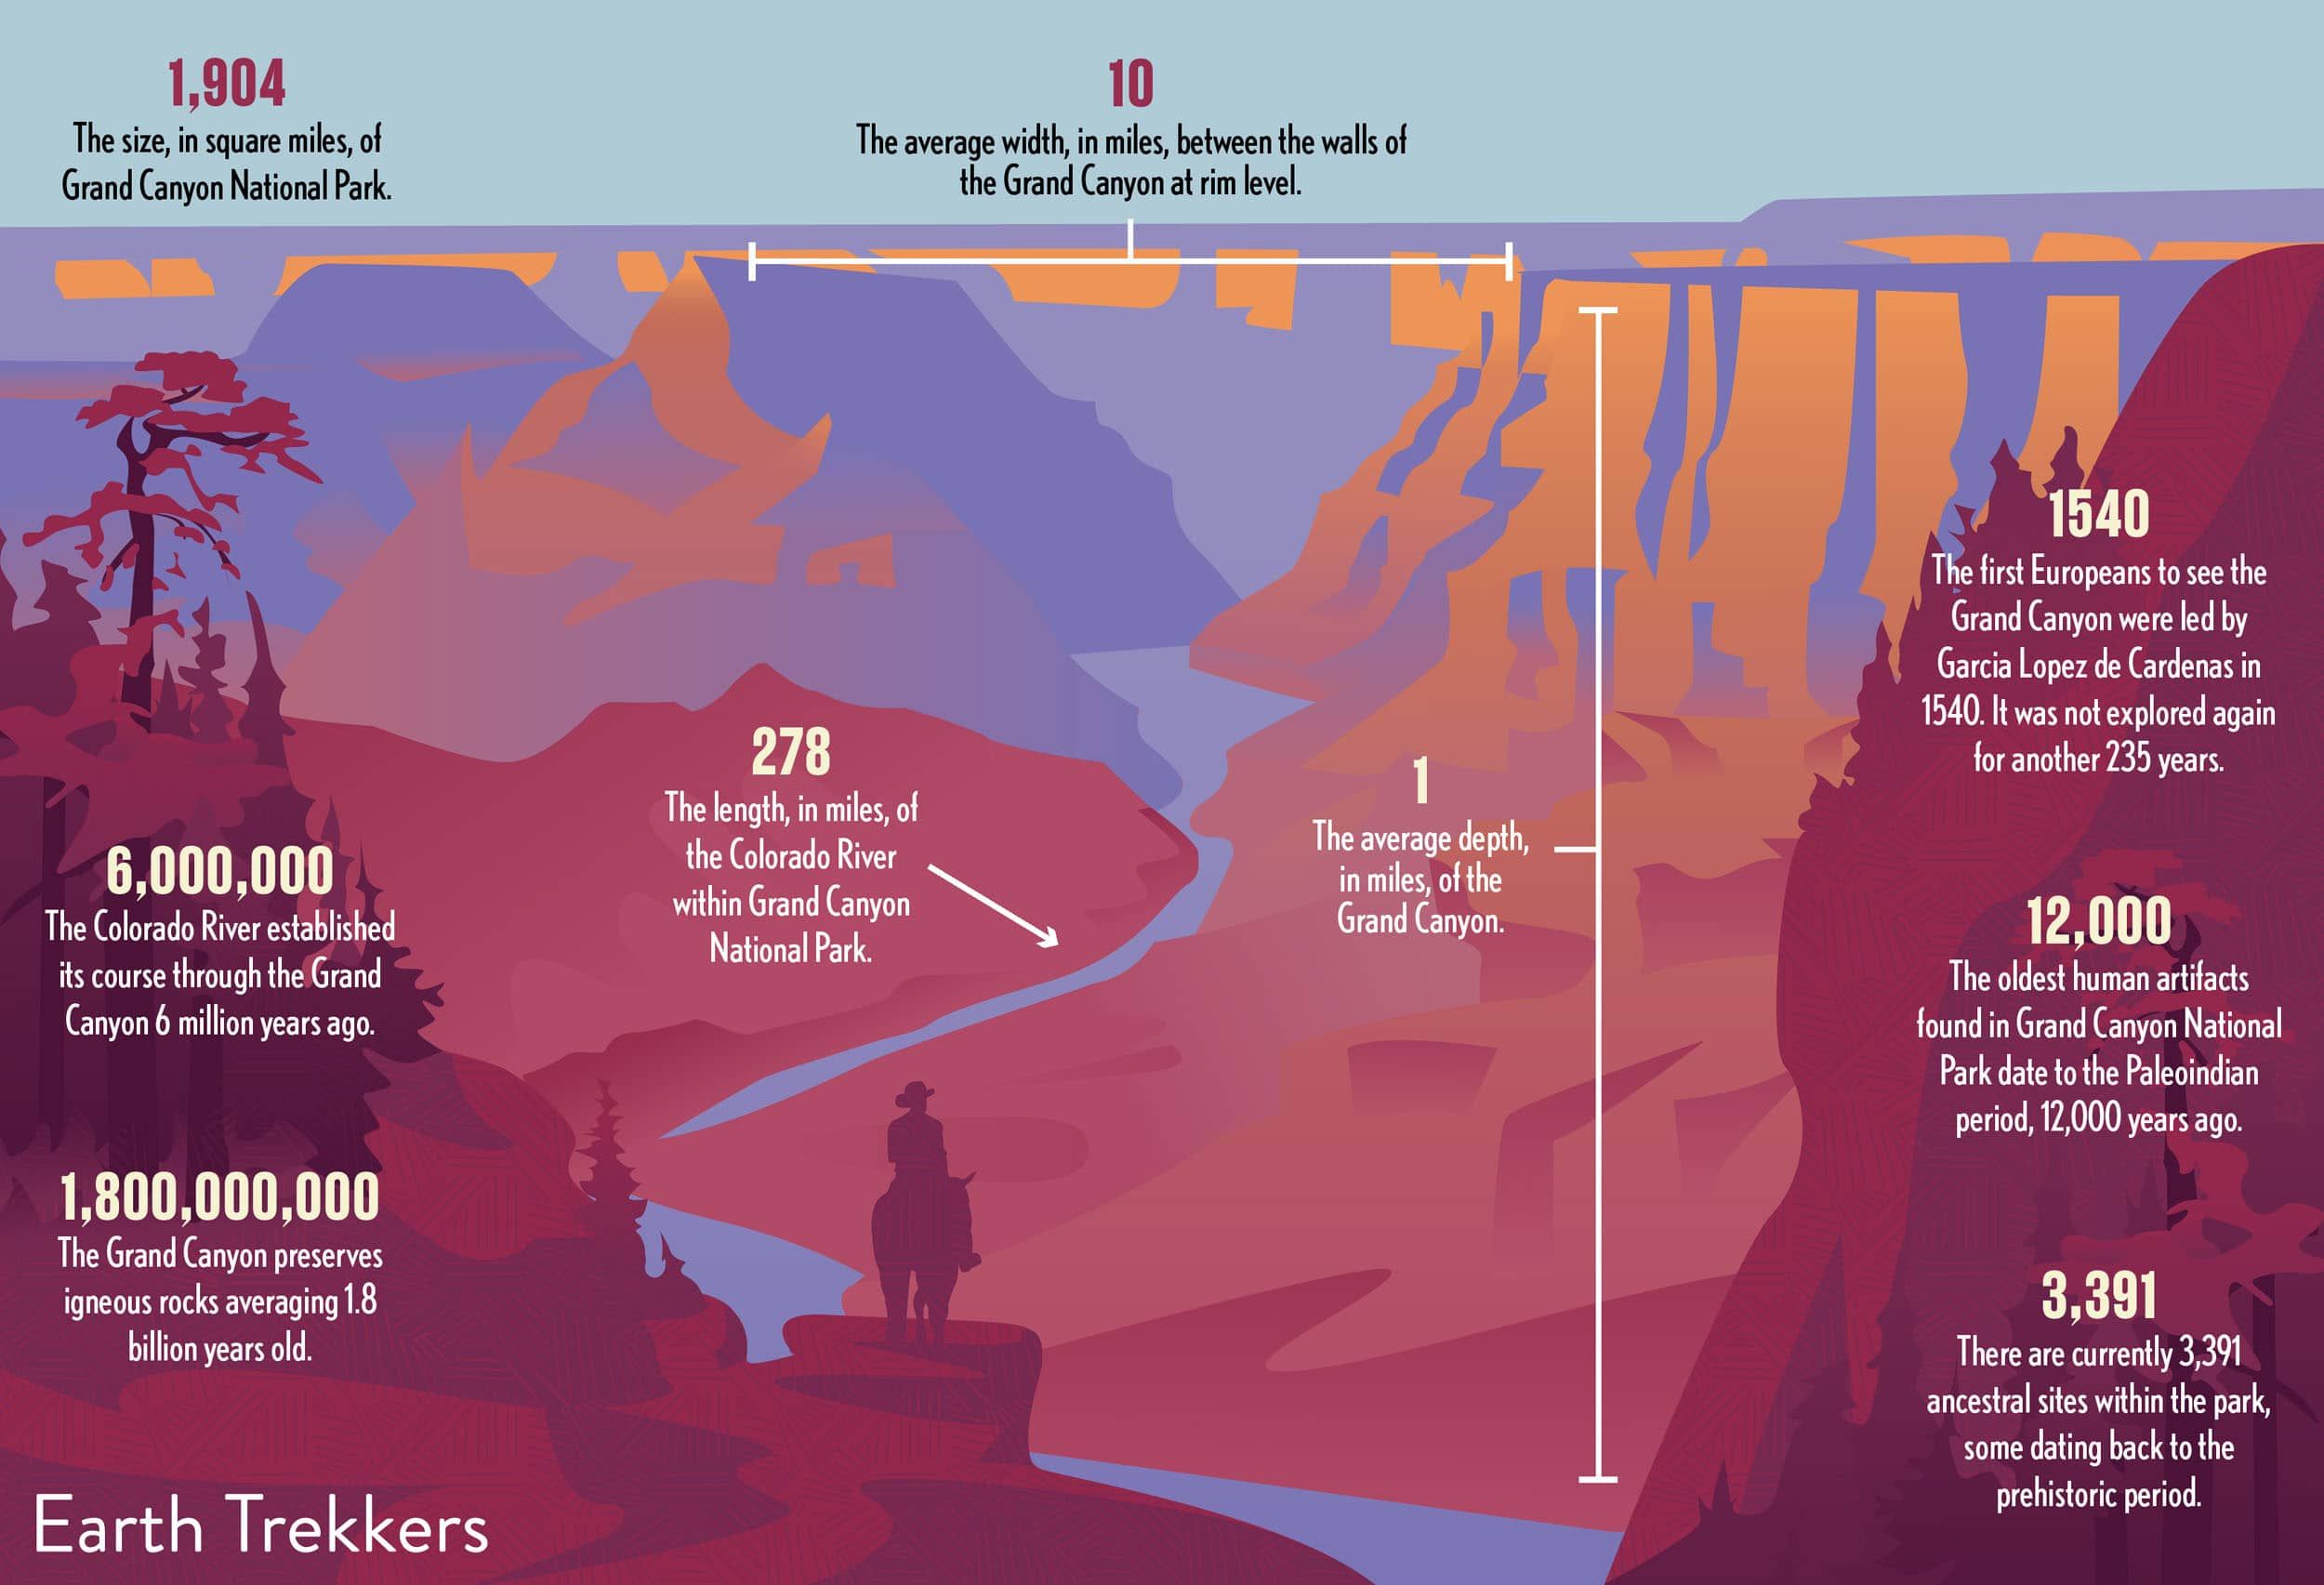 What do most people do at the Grand Canyon?